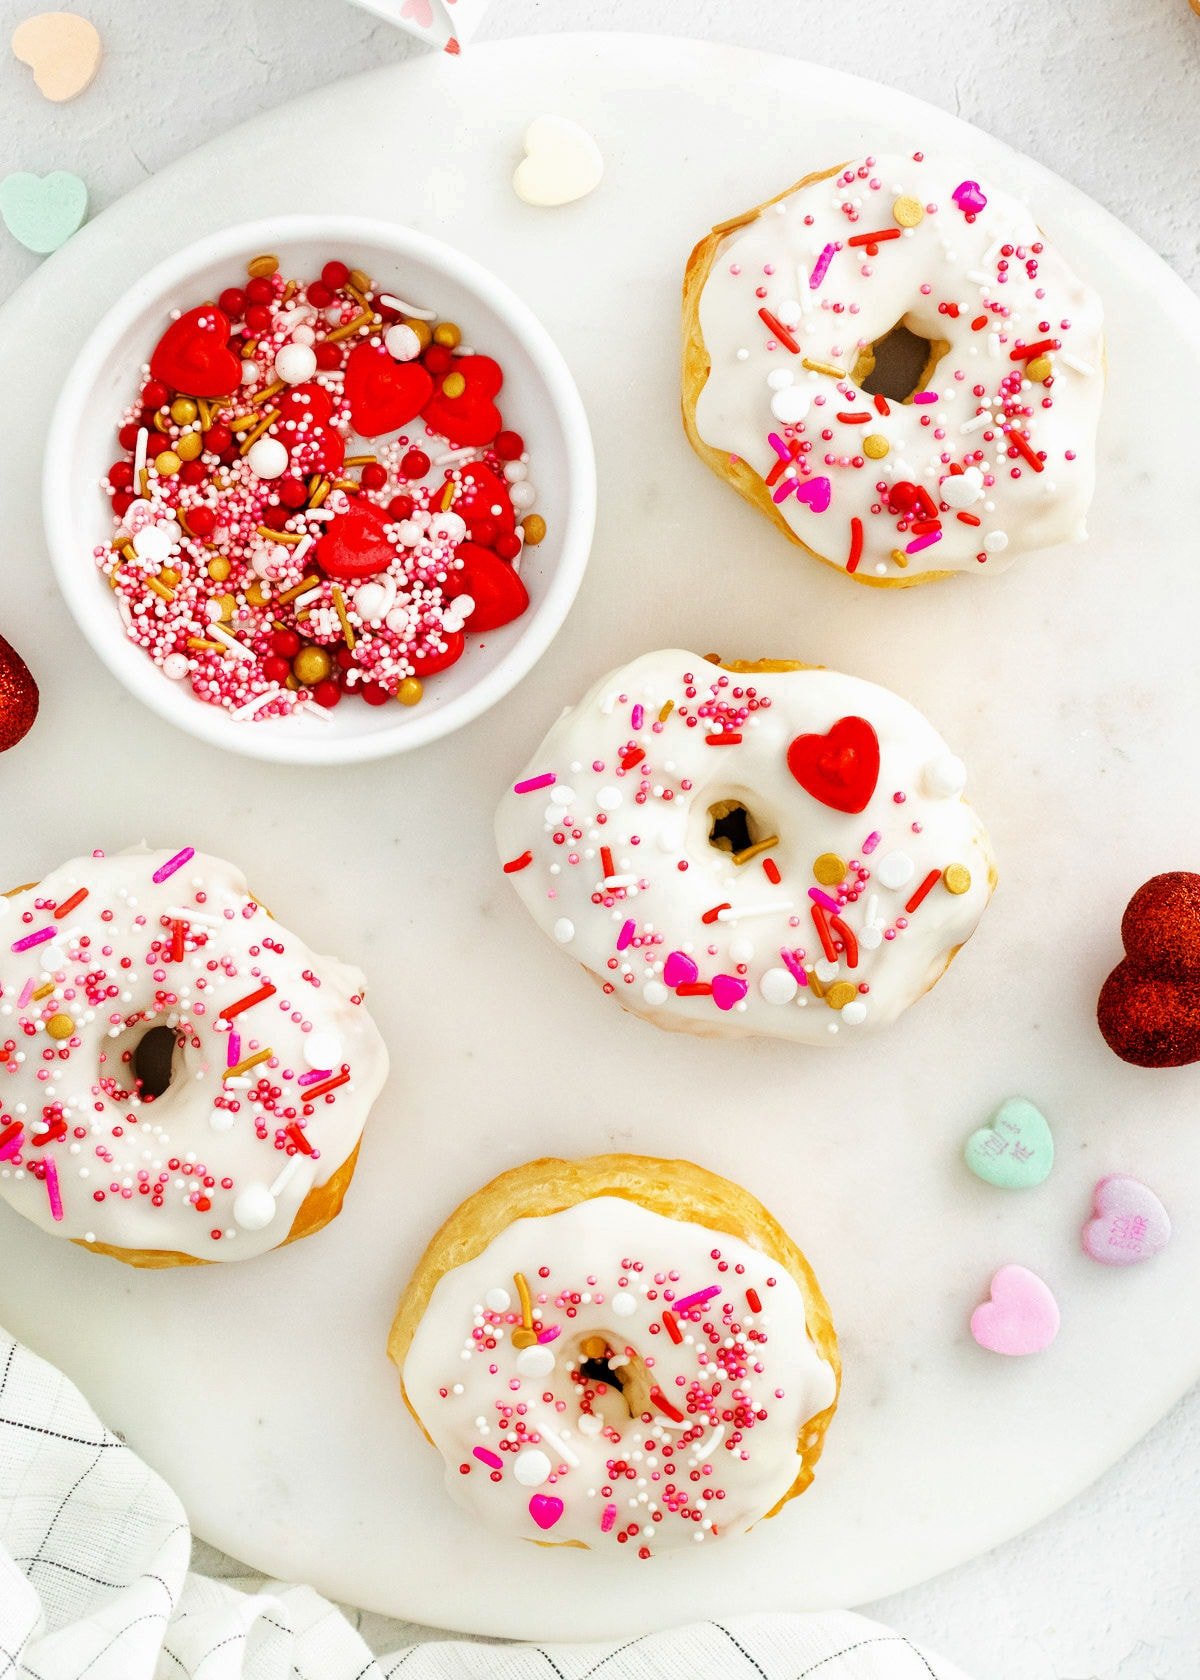 4 donuts decorated for Valentine's Day on marble round surface